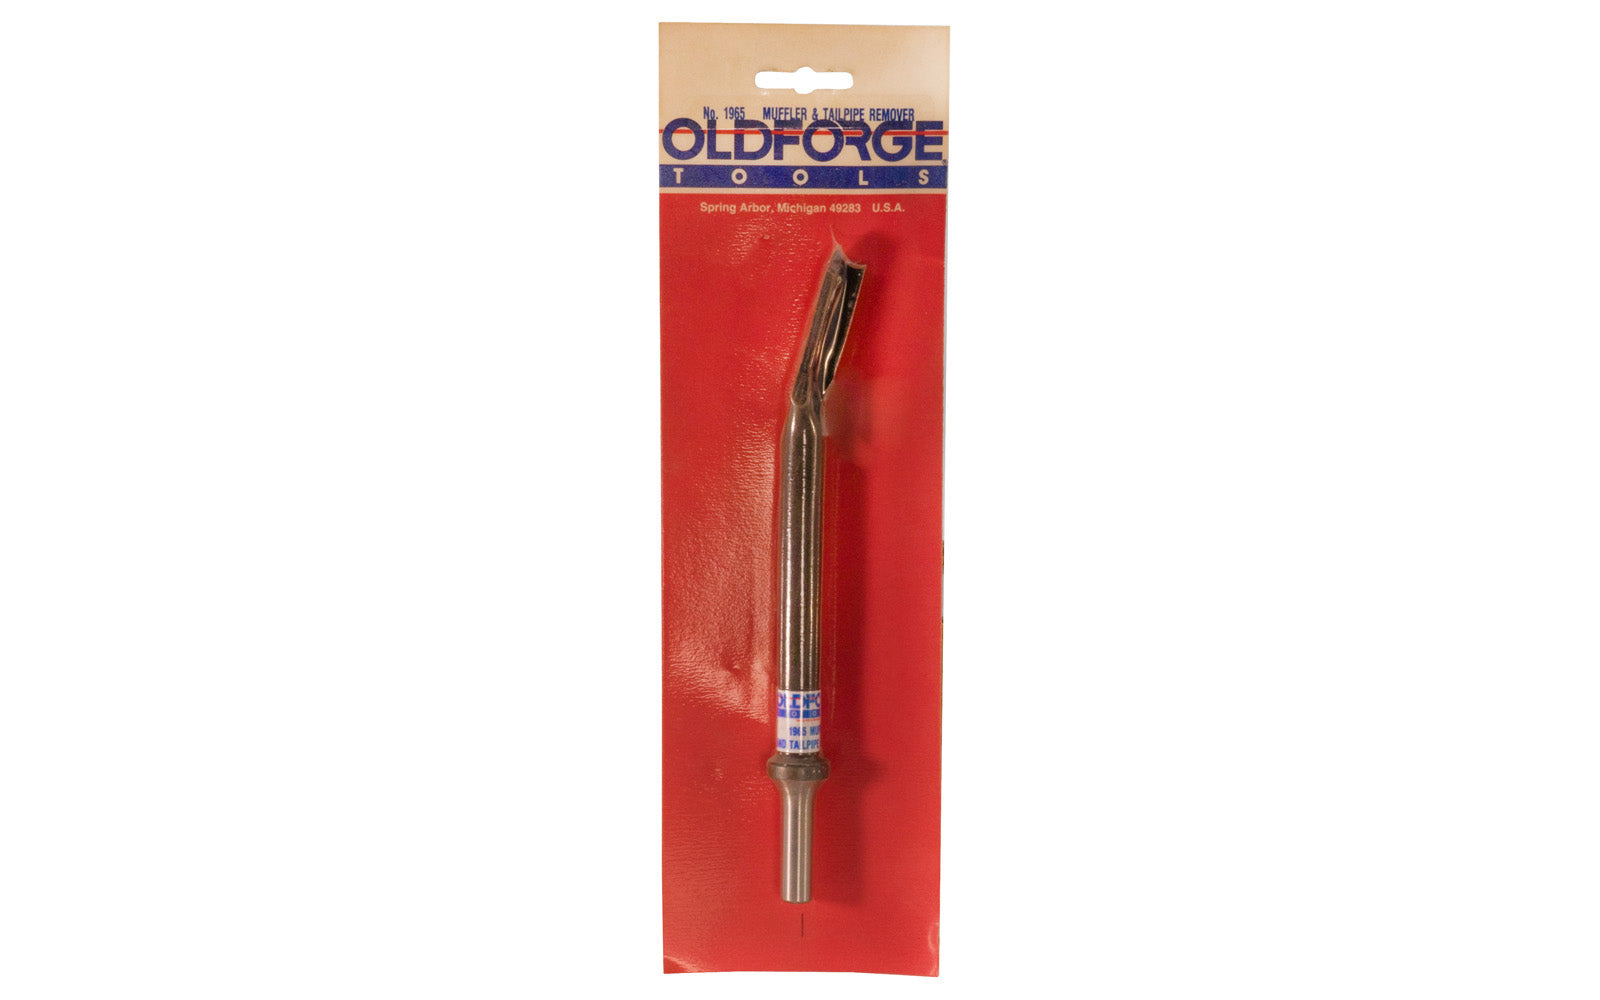 Old Forge Tools Muffler/Tailpipe Remover. Designed to separate telescoped tubing without damage to the inner section. Made in USA. 762869066008